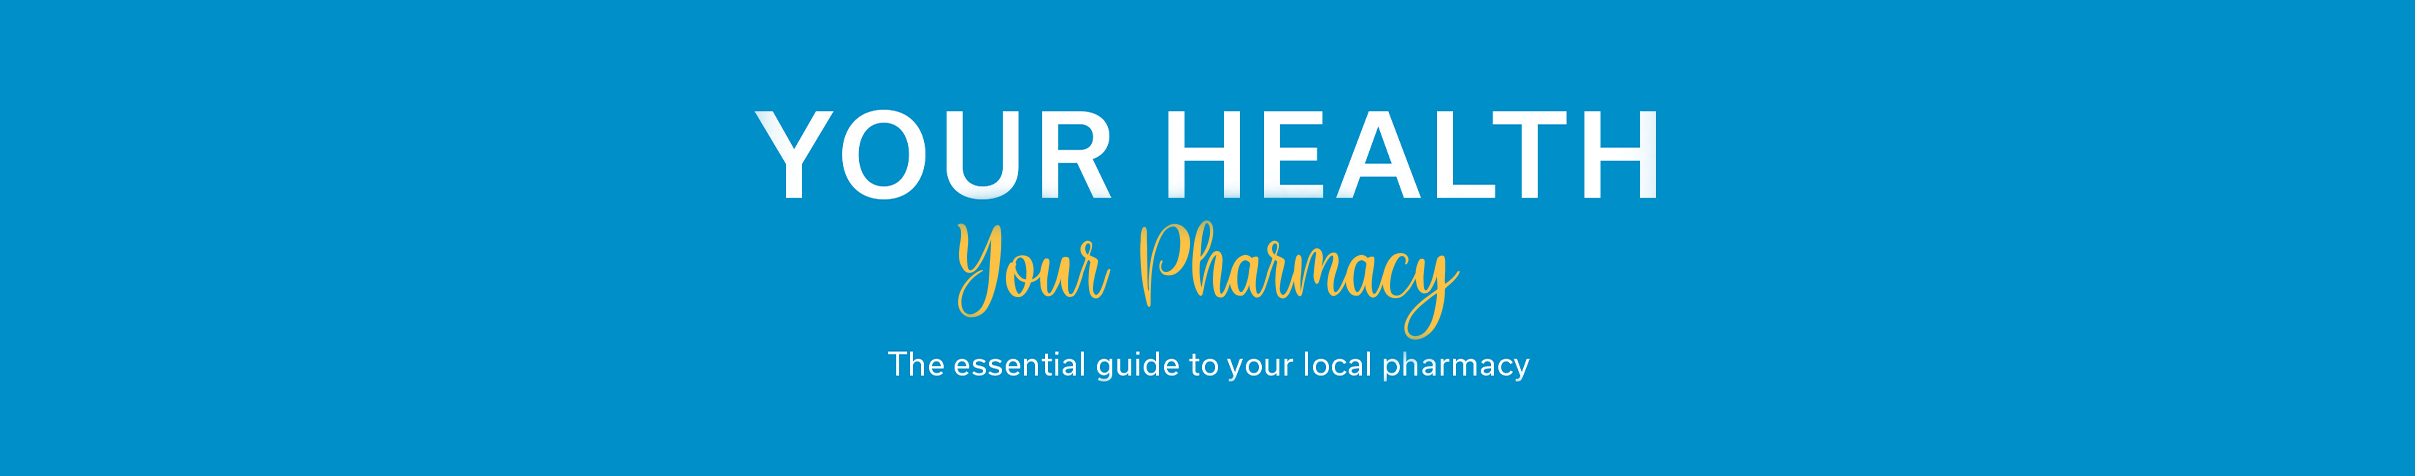 Your Health Your Pharmacy